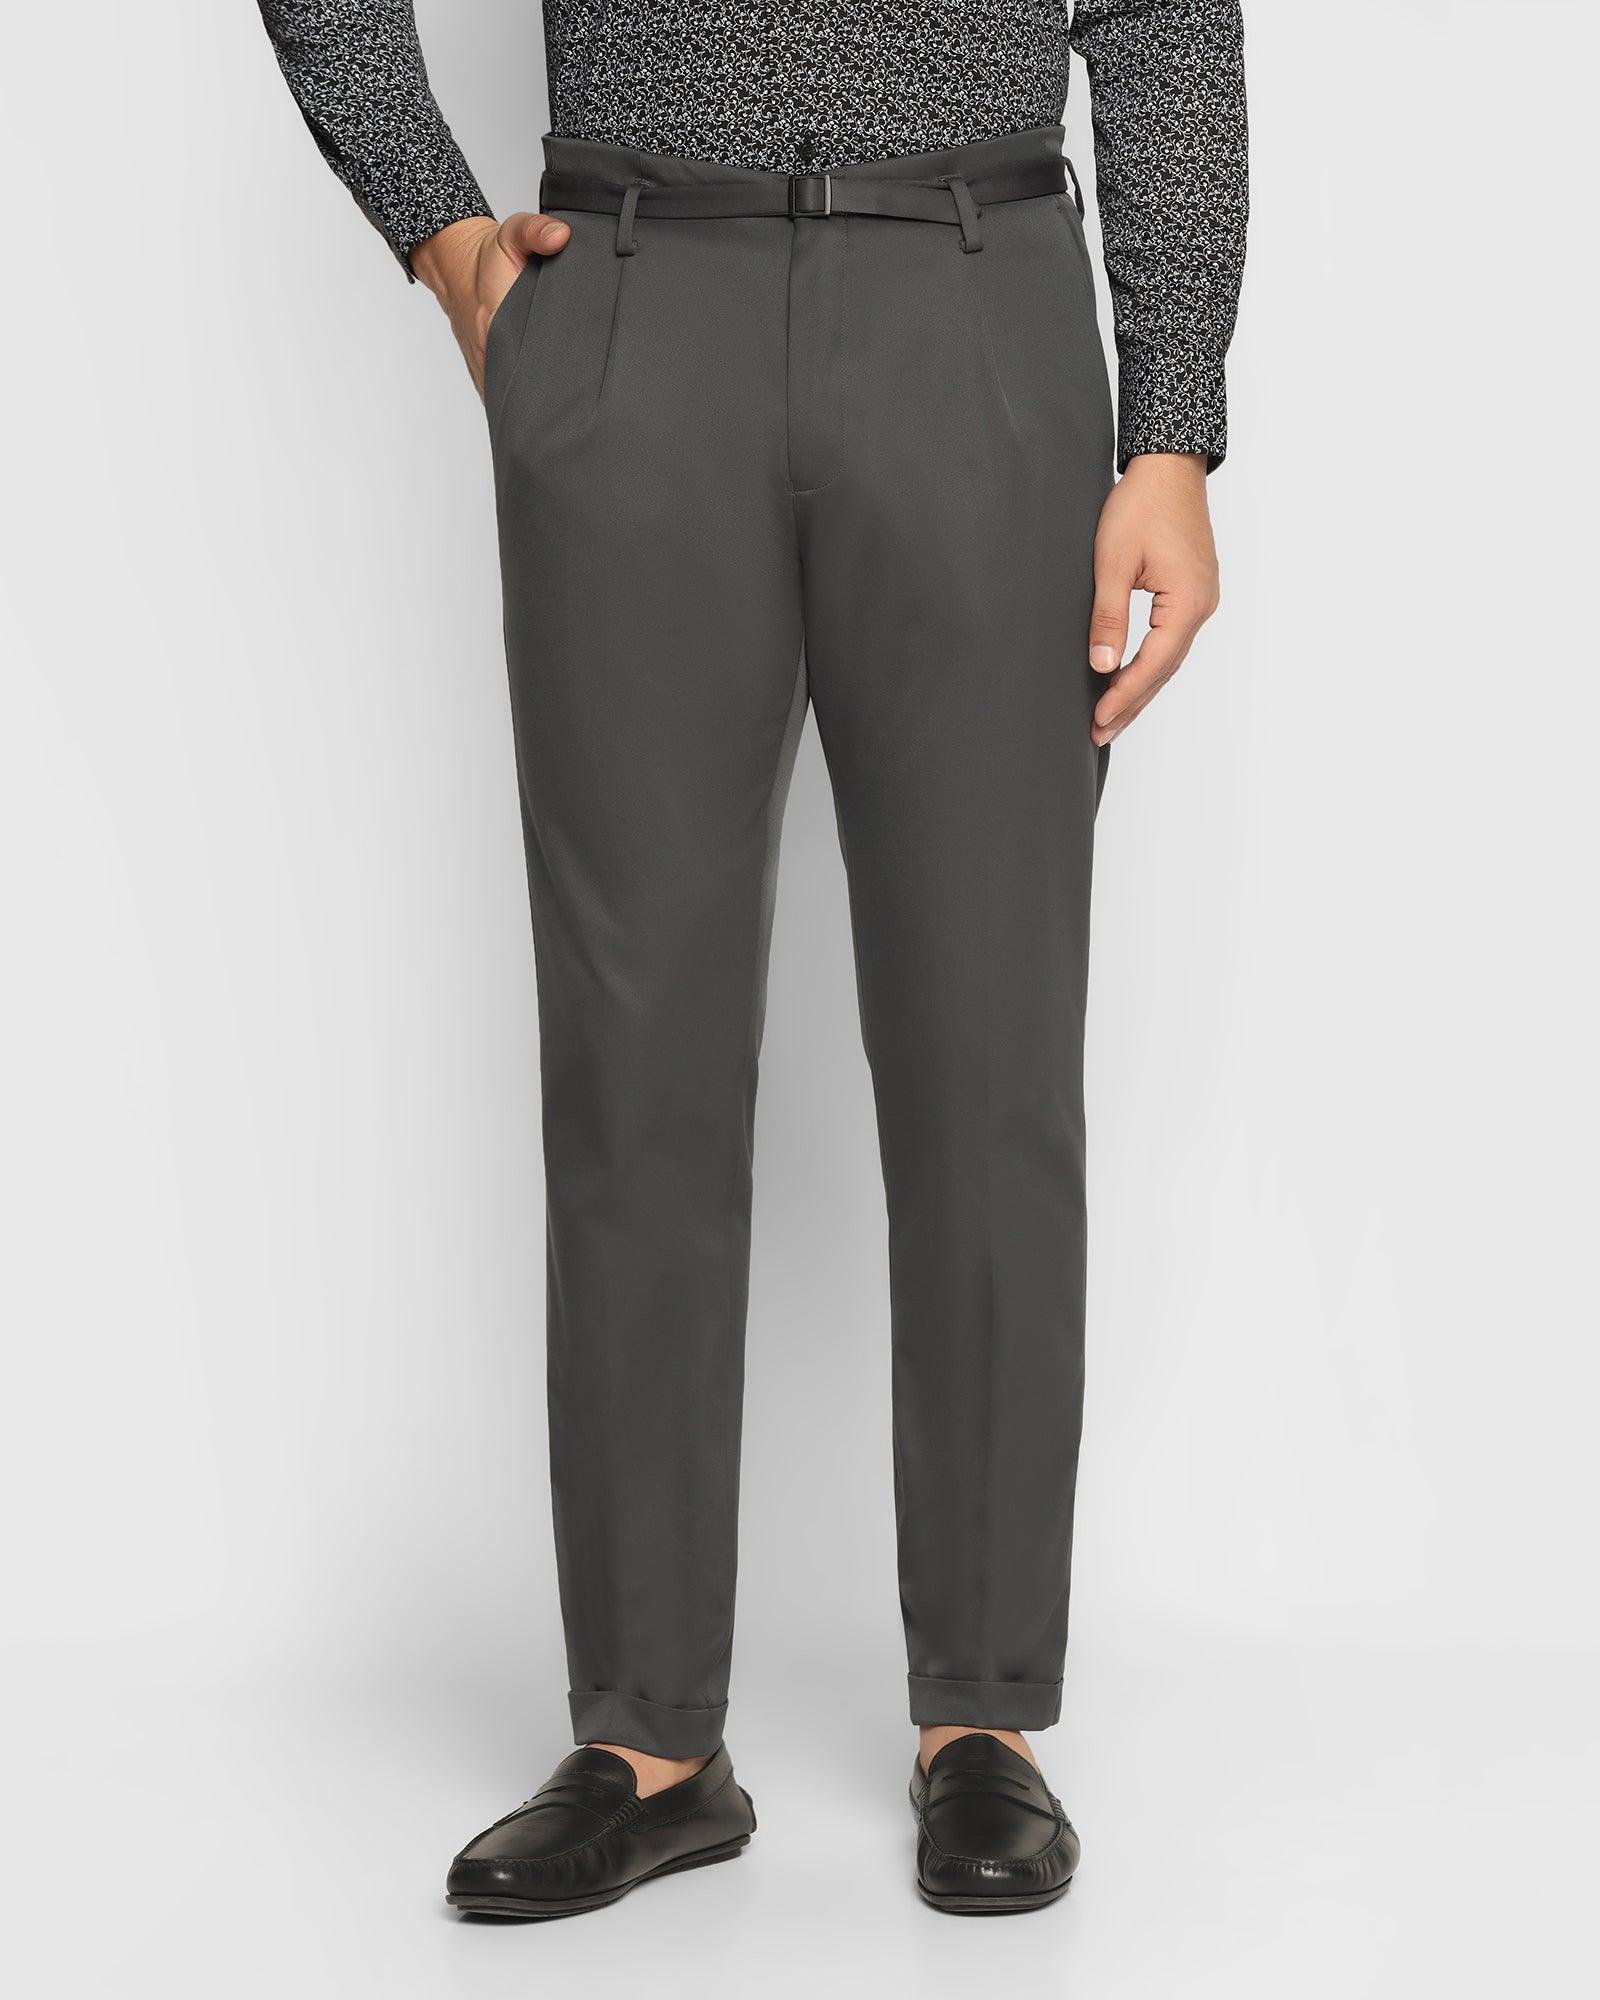 formal trousers in charcoal nxt fit (silas)